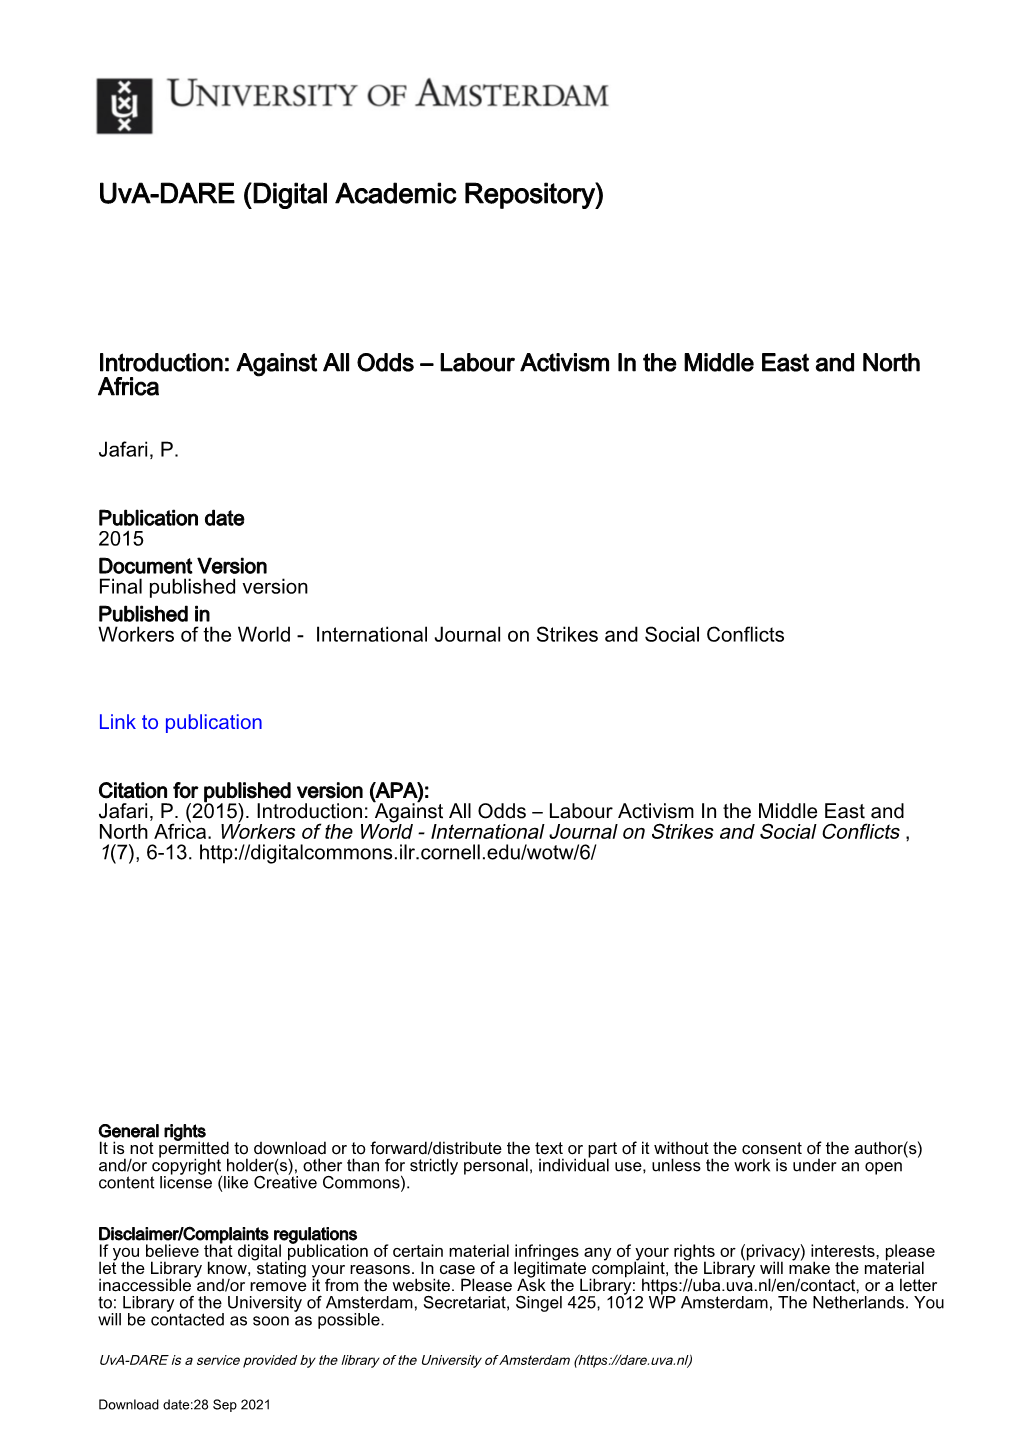 Workers of the World - International Journal on Strikes and Social Conflicts